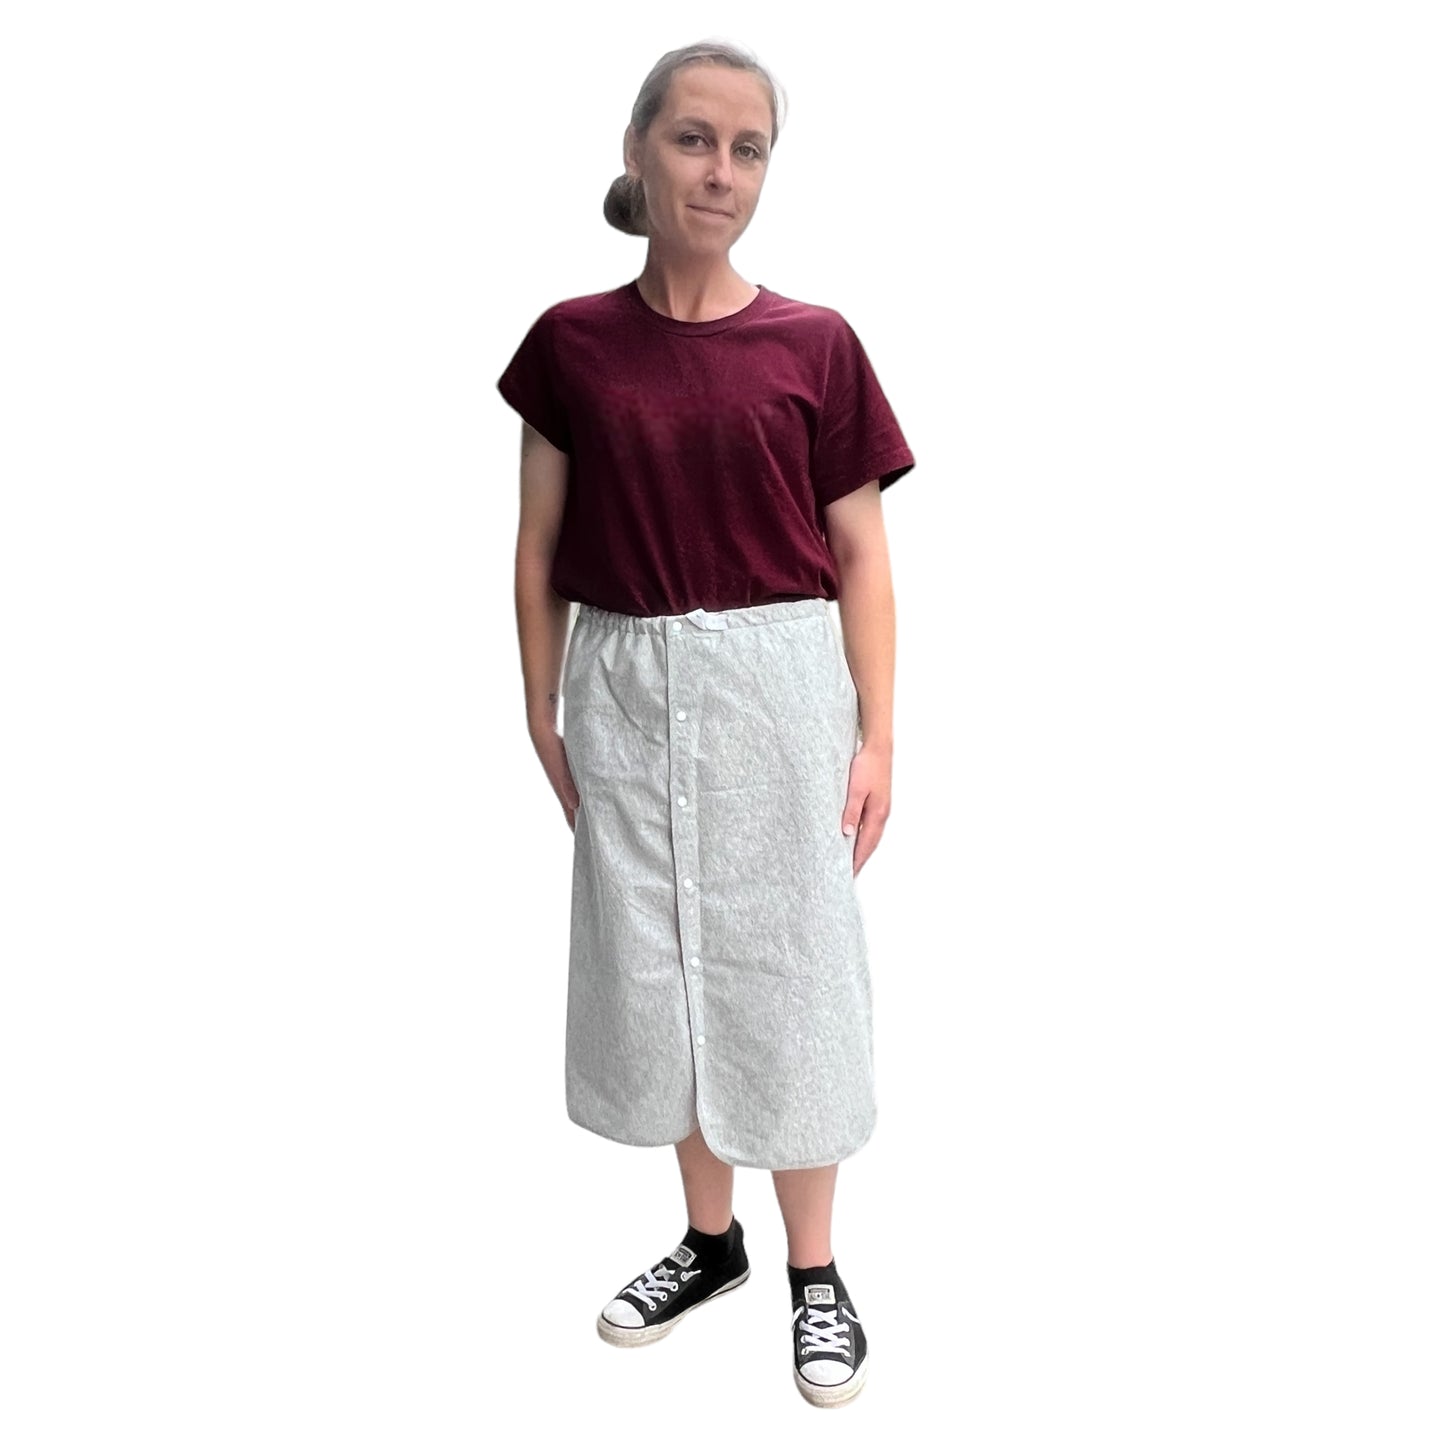 Adult Waterproof Continence Skirt (Snaps)